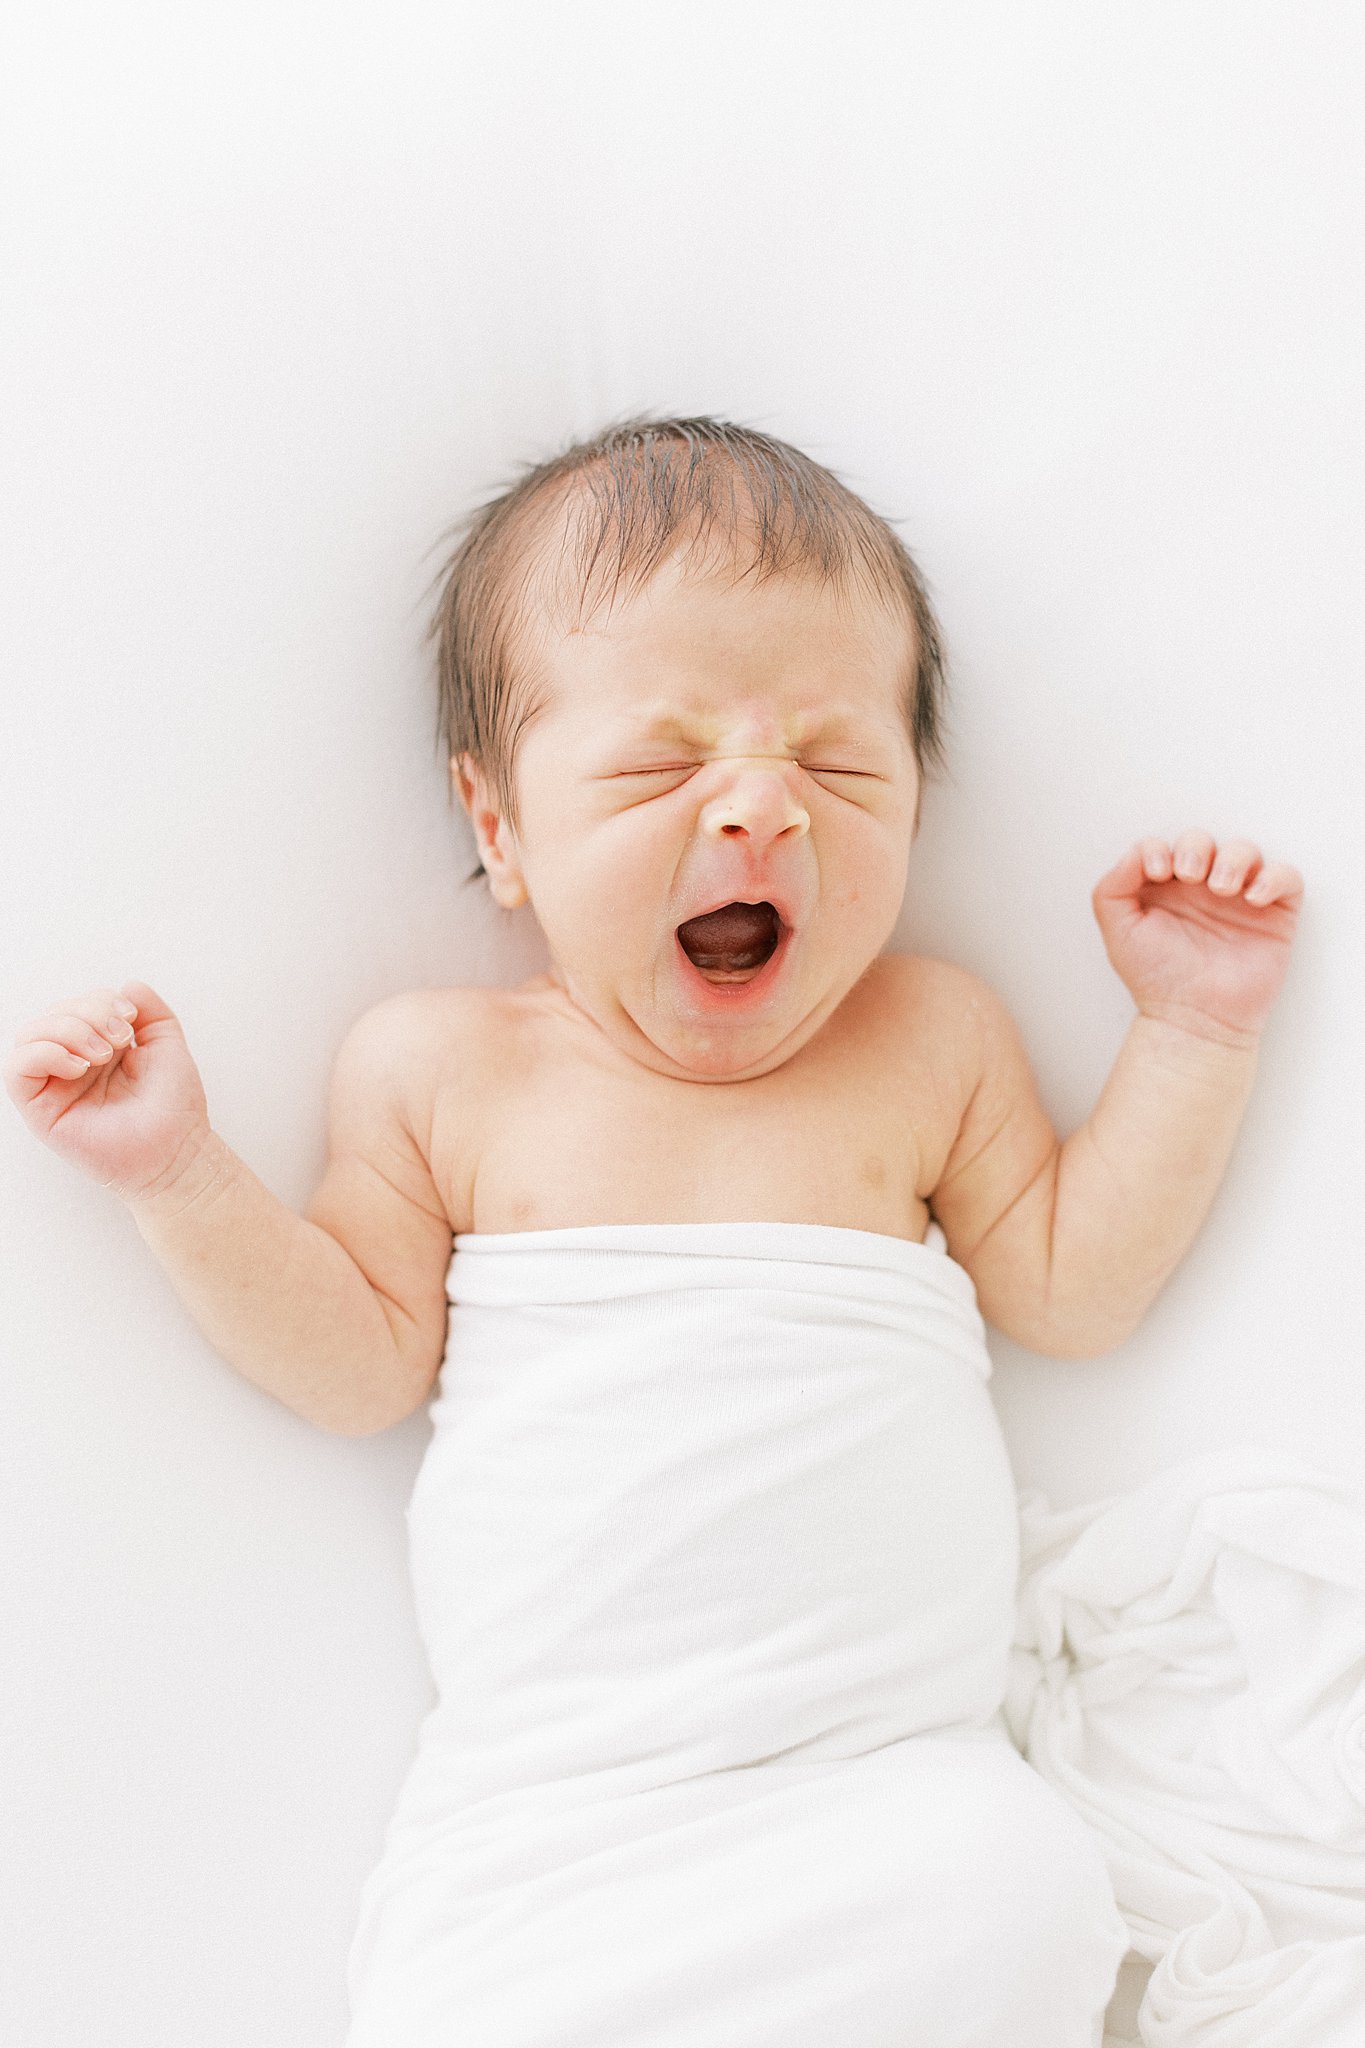 A newborn baby lets out a large yawn on a white bed